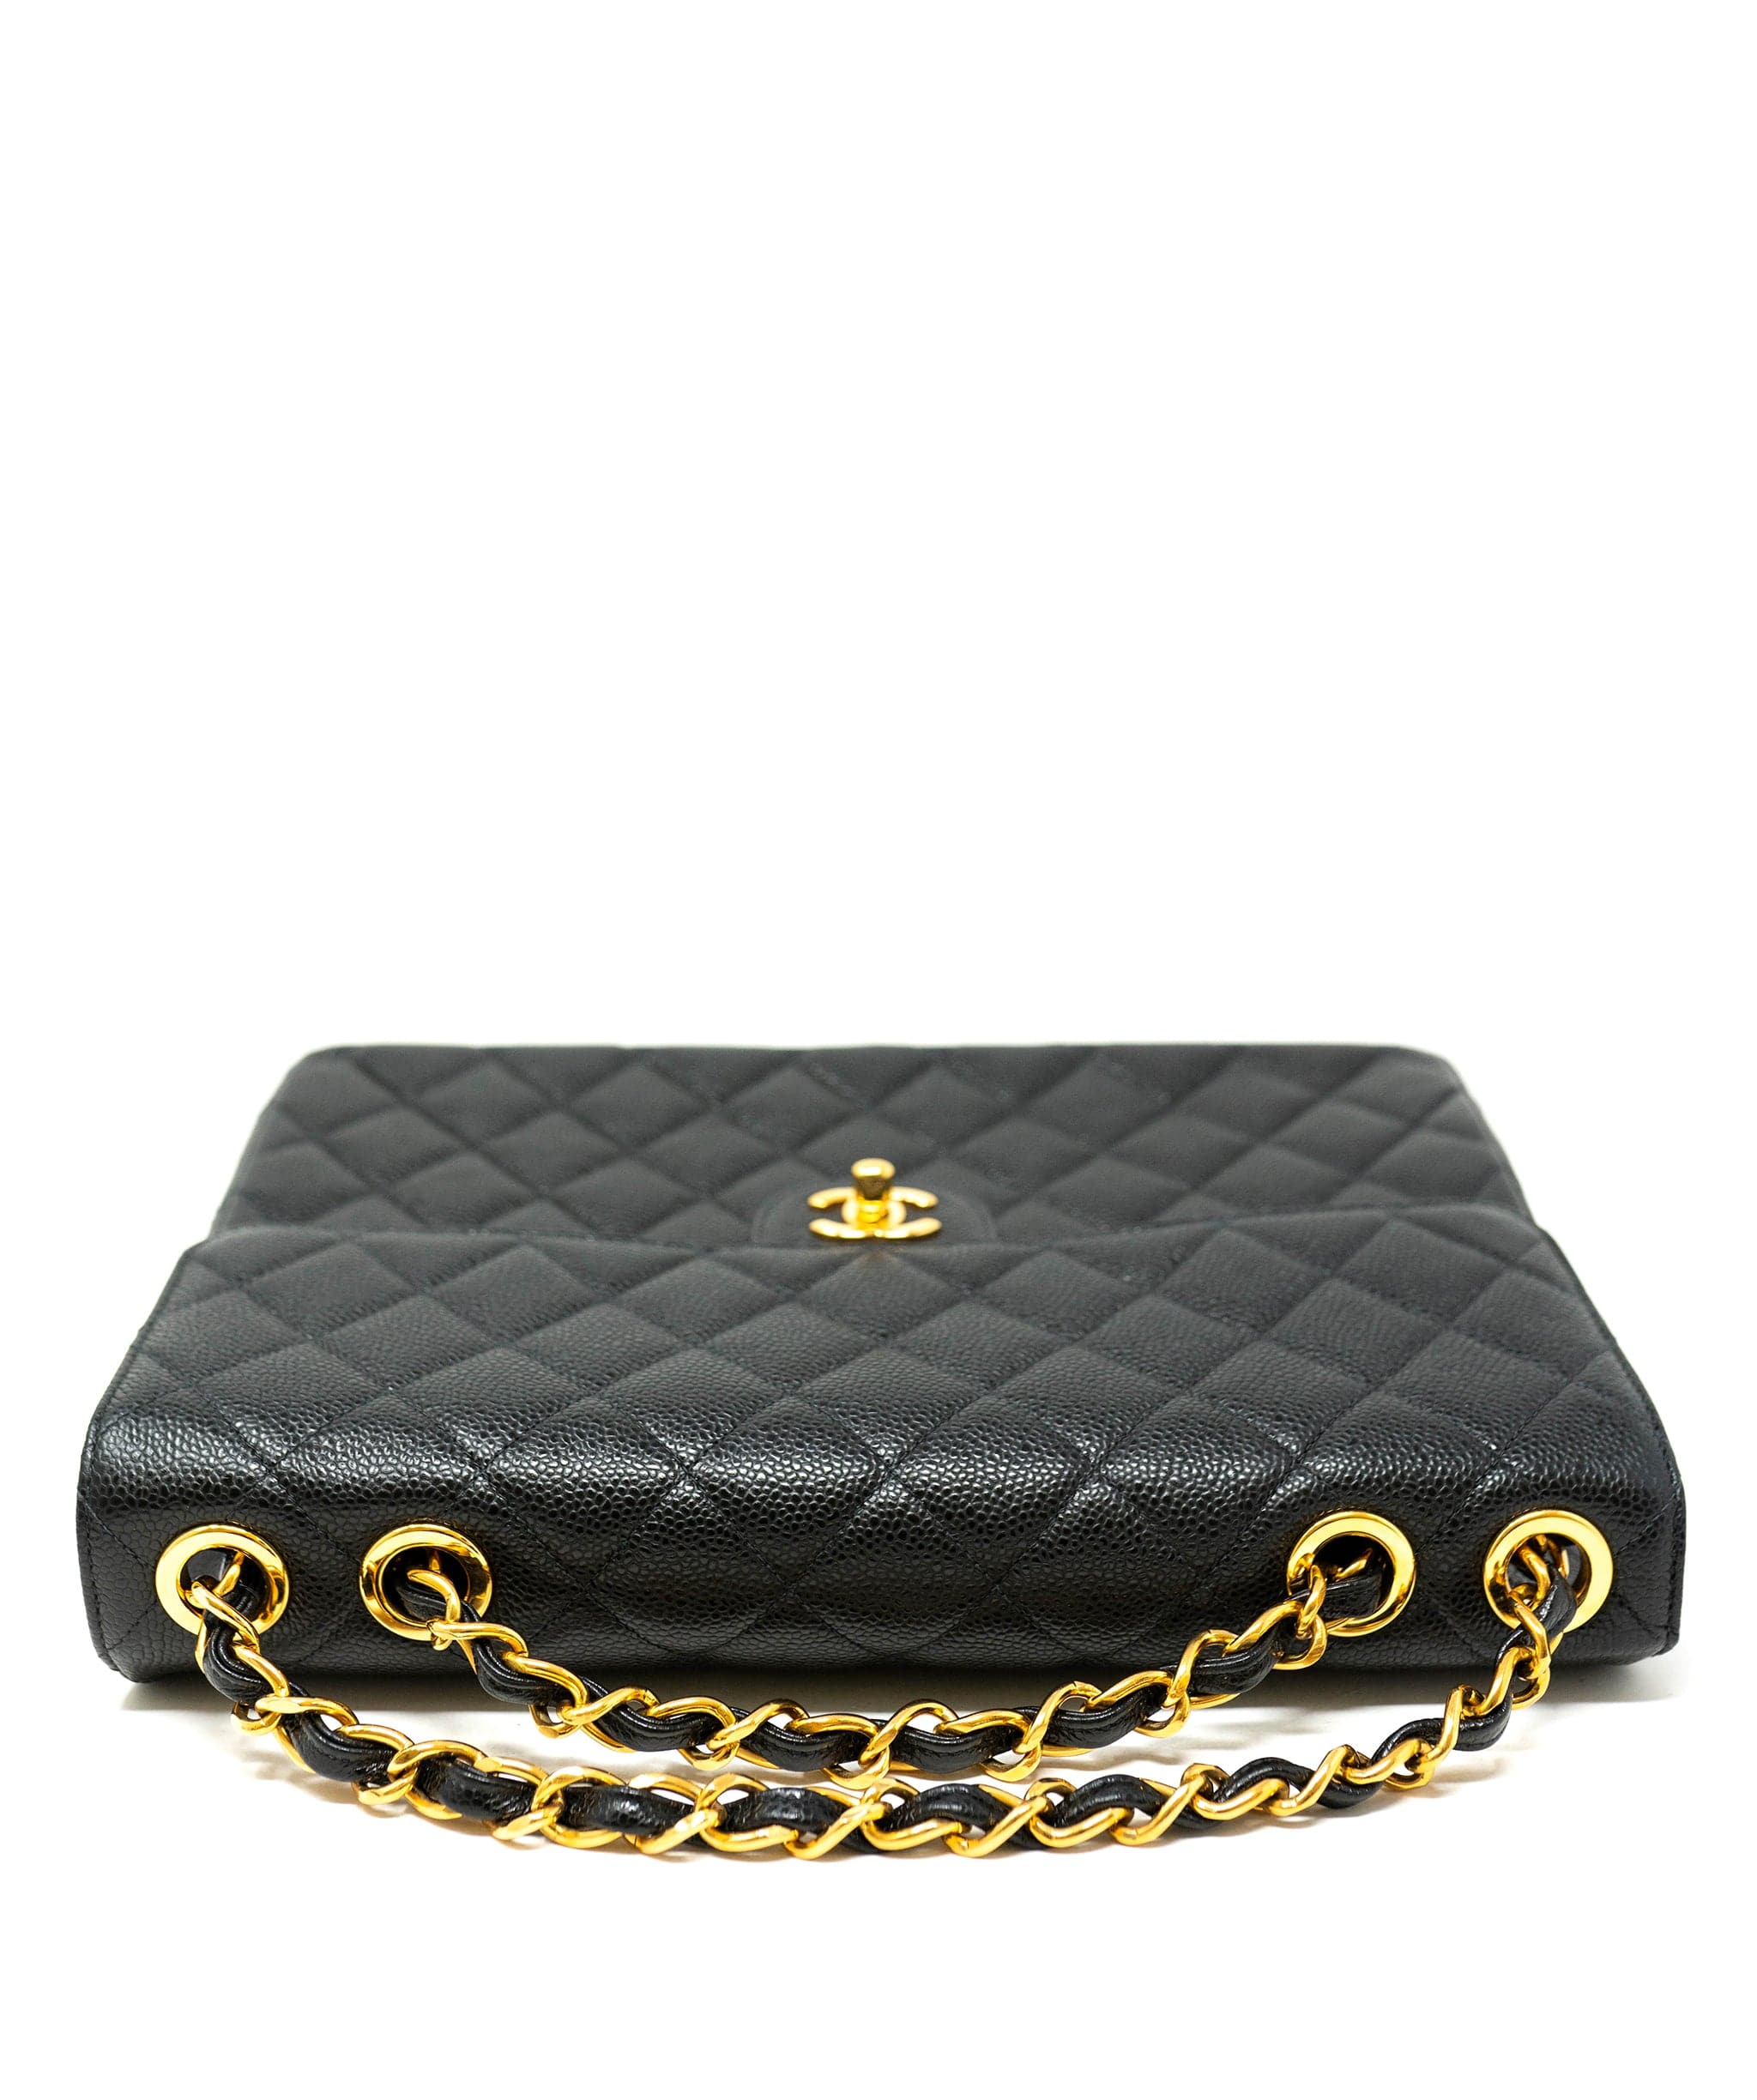 Chanel Chanel Classic Flap Jumbo Double Chain with Small CC turnstile lock ASL3204